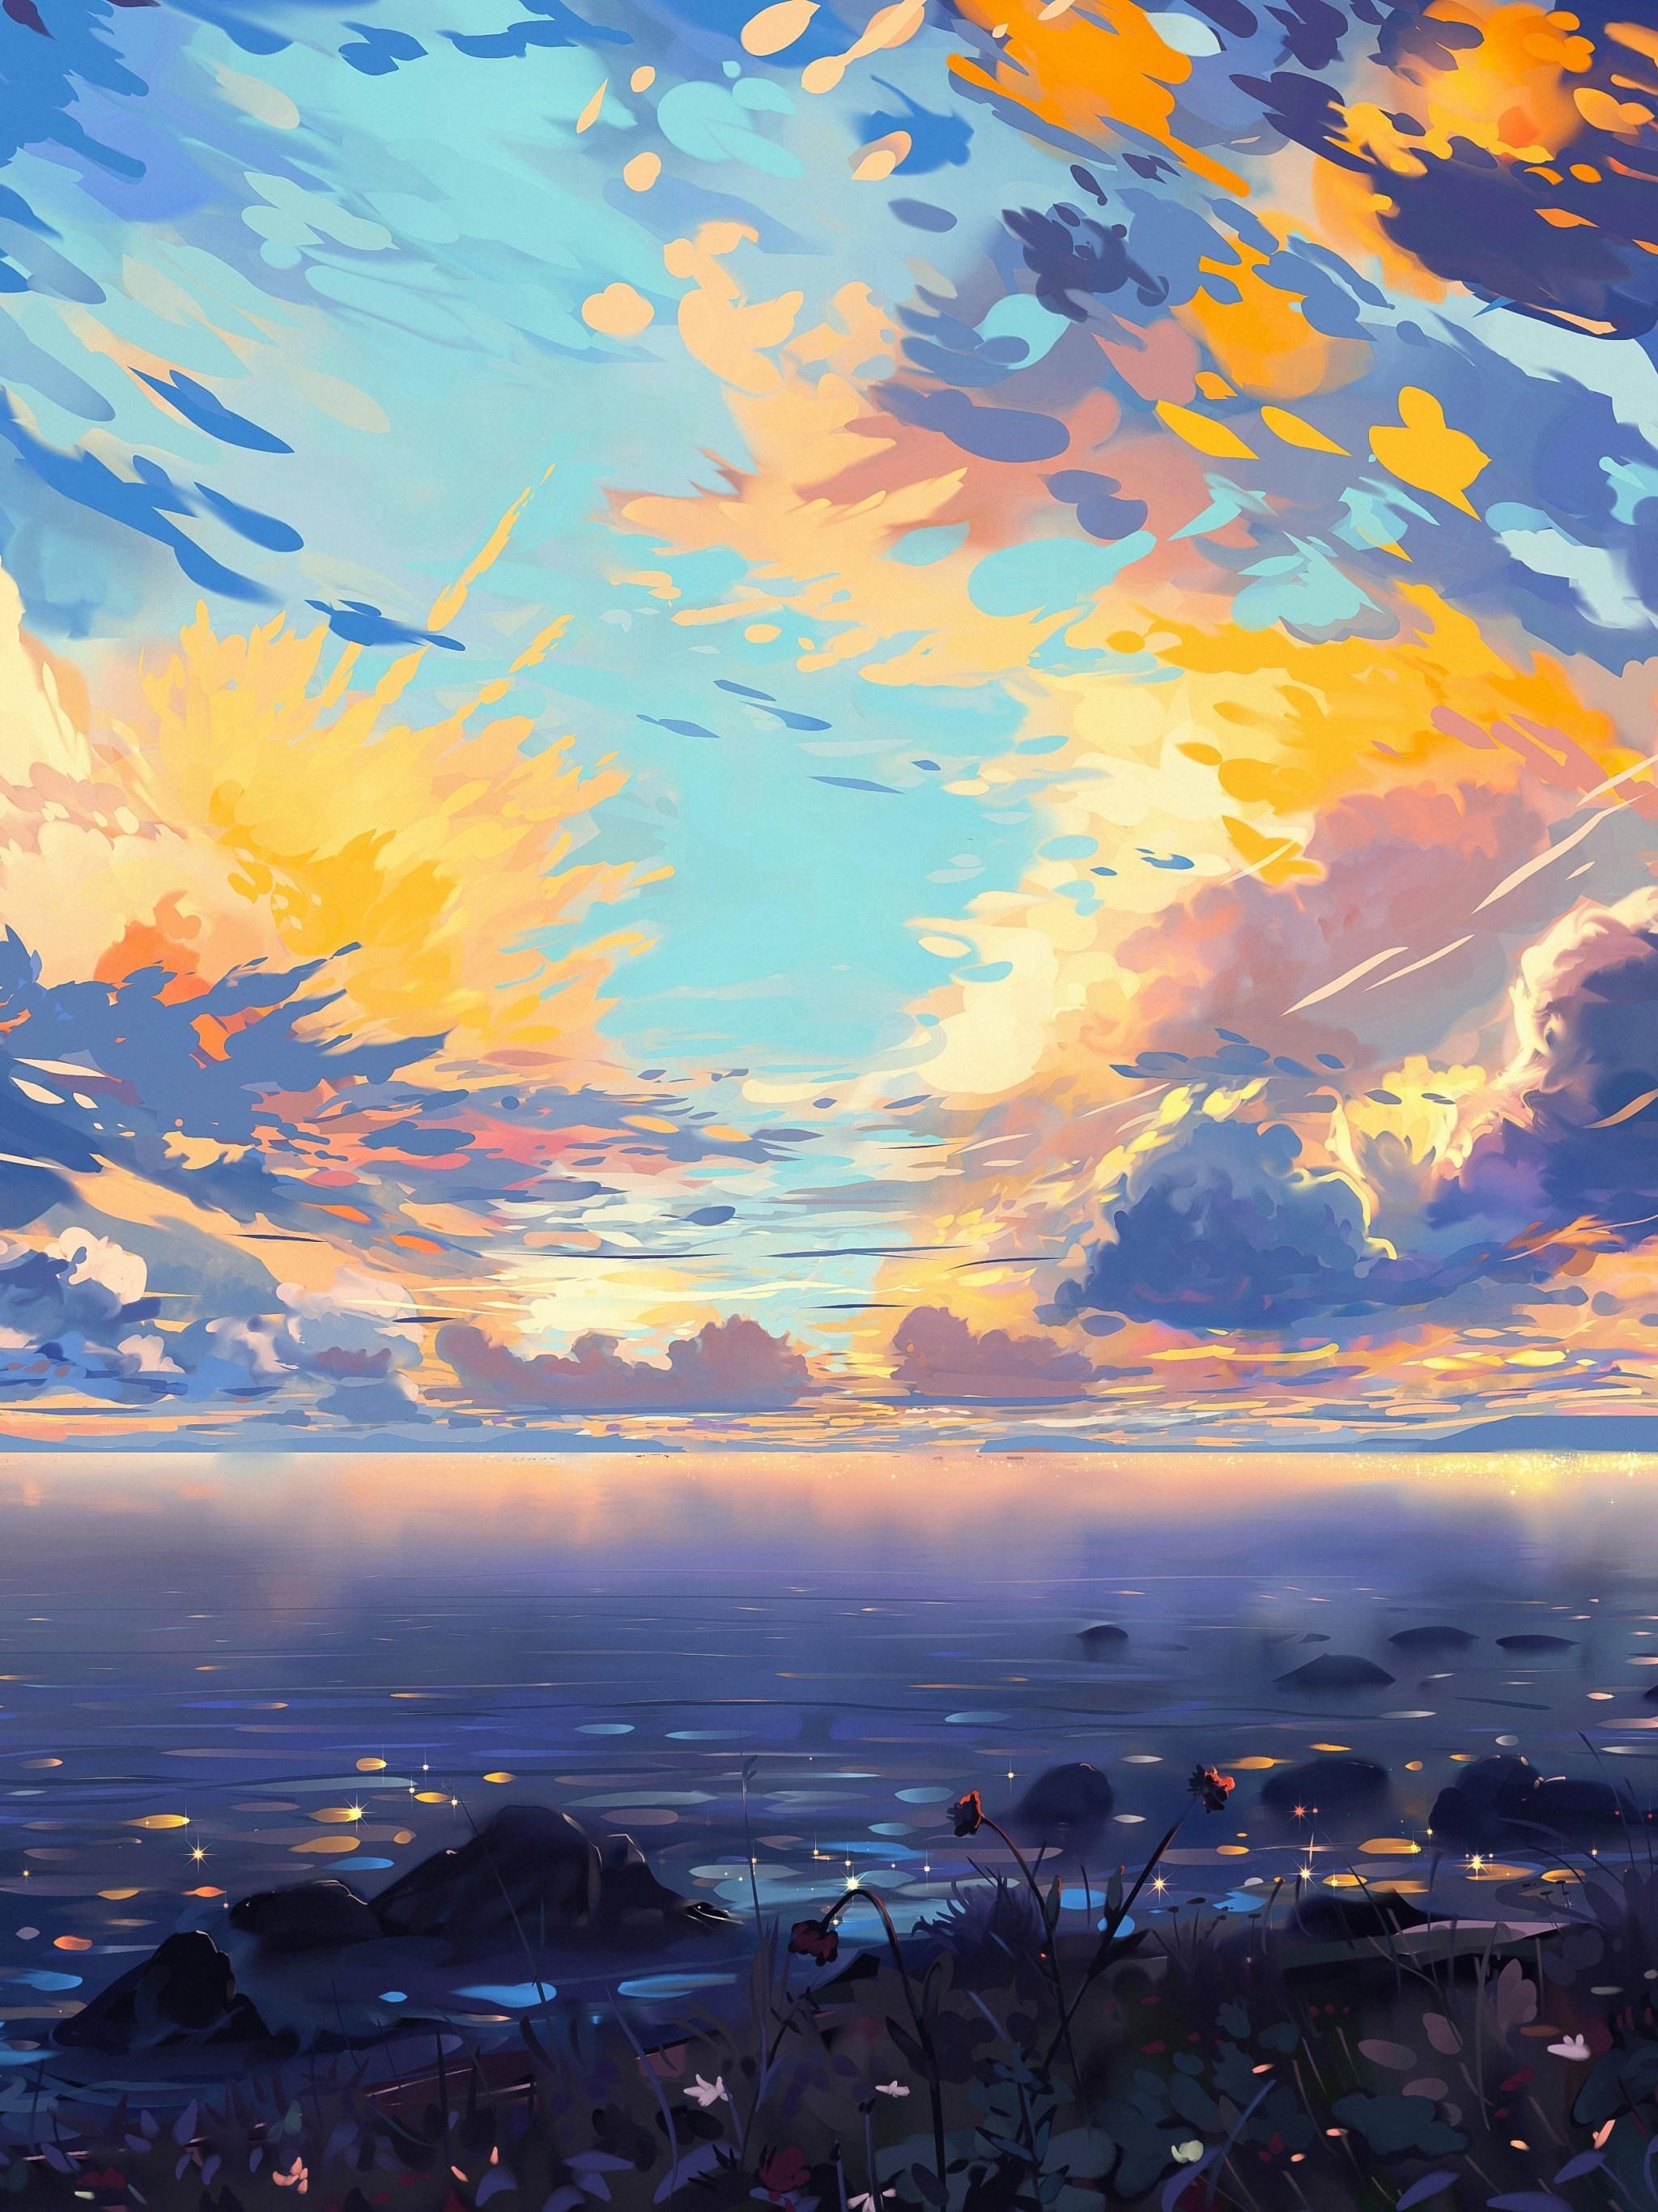 Download 2048x2732 Anime Landscape, Sea, Ships, Colorful, Clouds